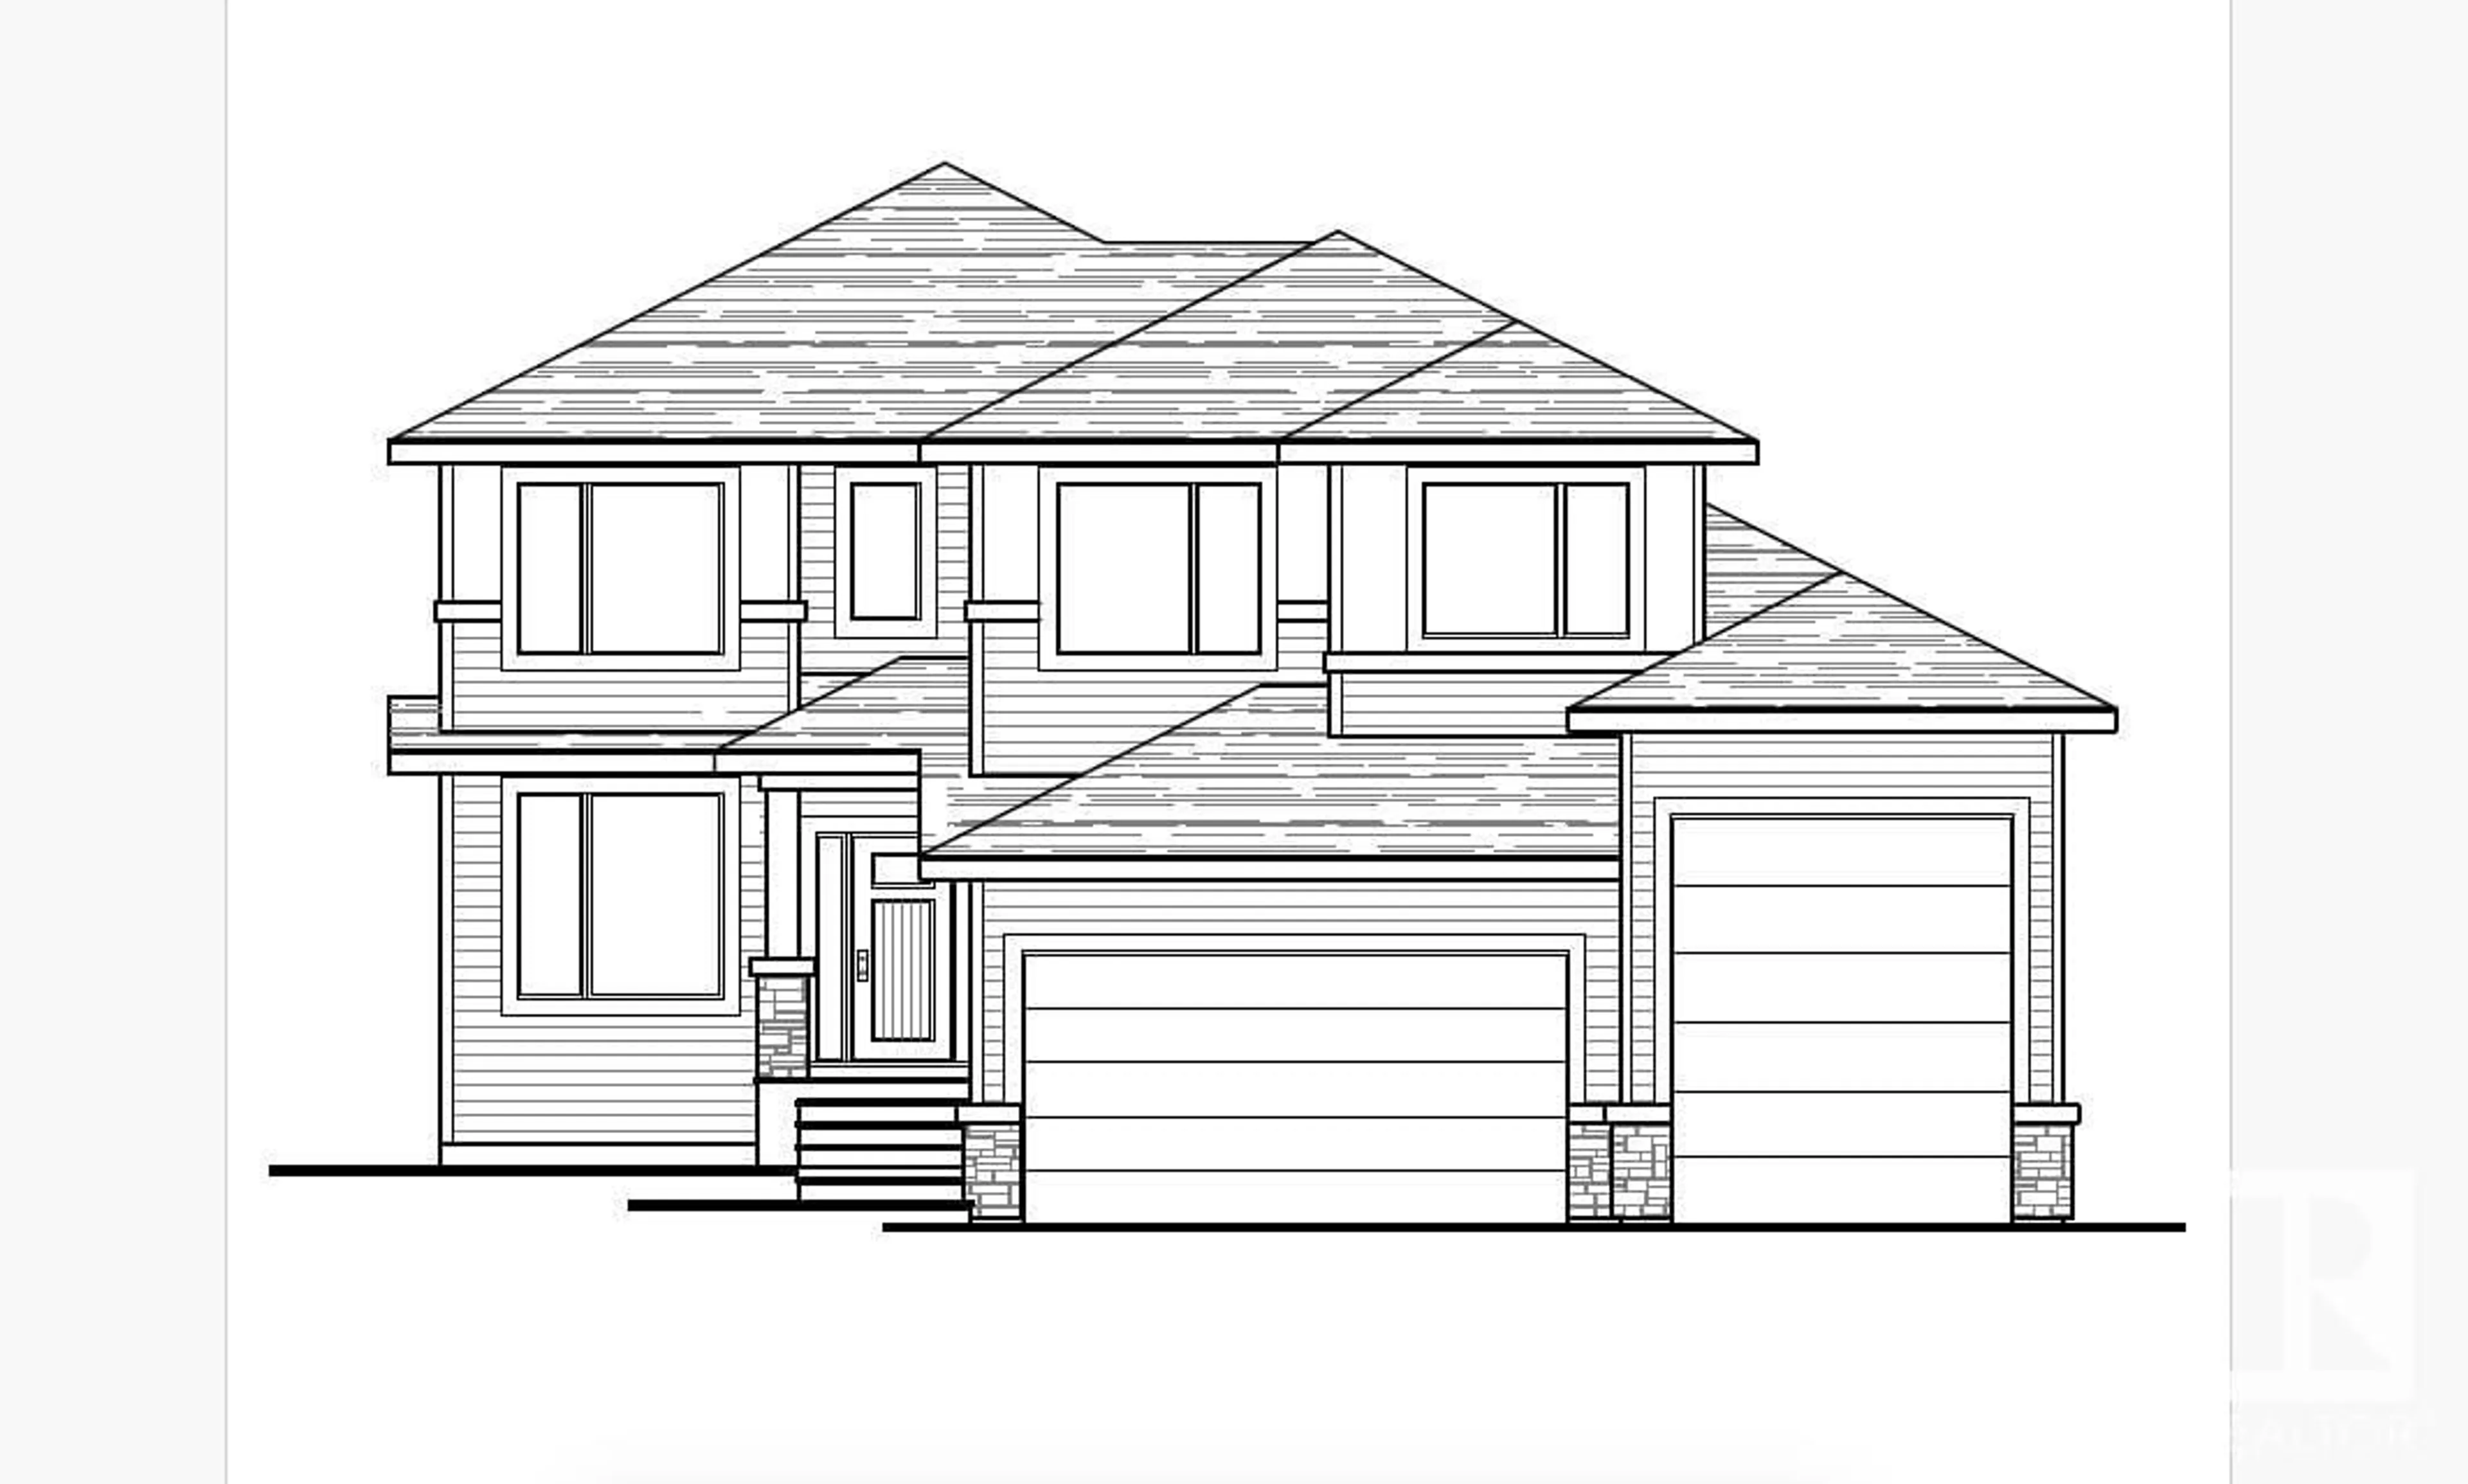 Frontside or backside of a home for 9 Holdin CO, Spruce Grove Alberta T7X0Y4